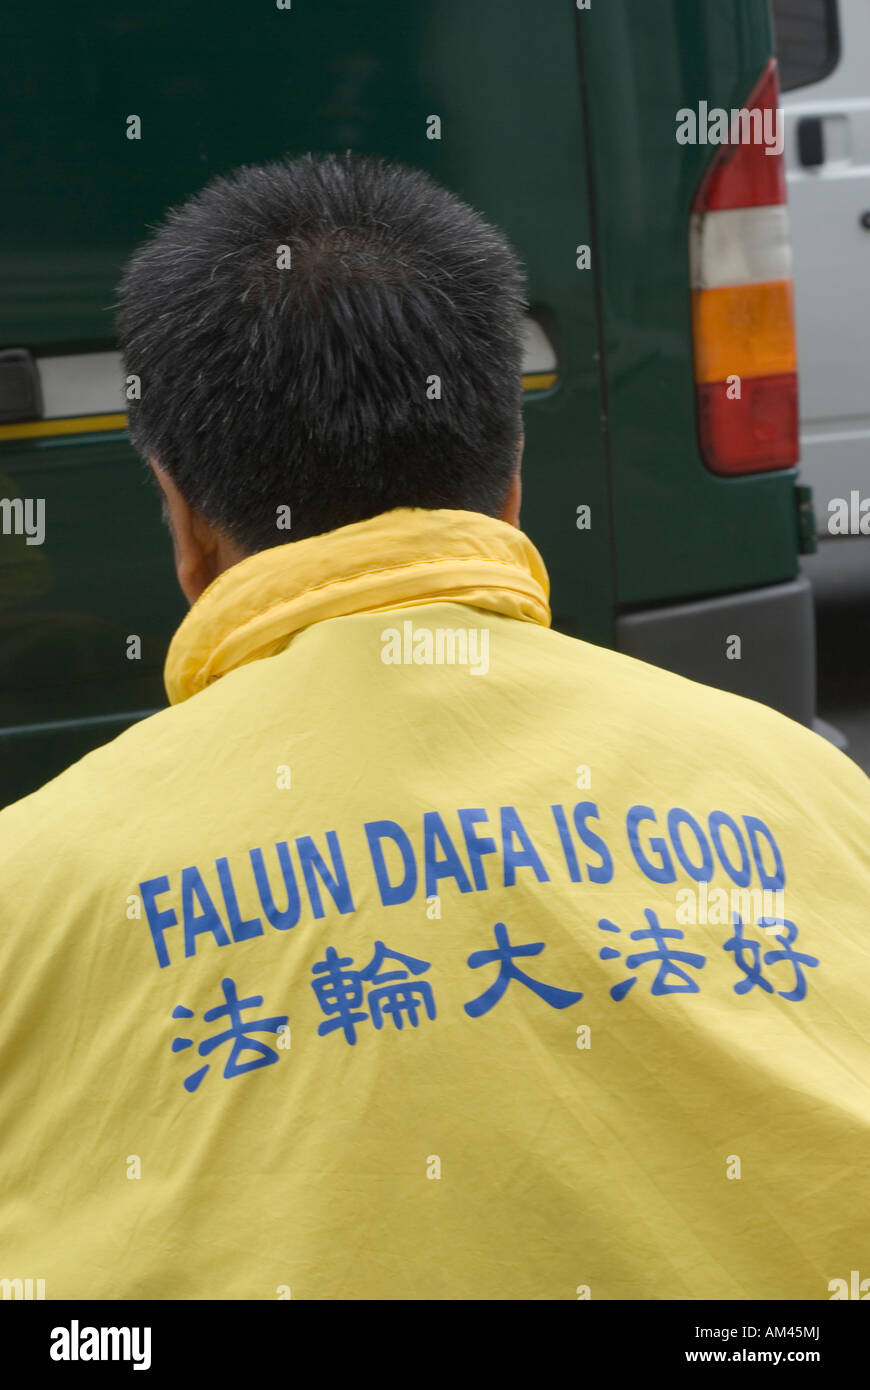 Falun Dafa is Good caption on back of lonely demonstrator outside Chinese embassy in London Stock Photo